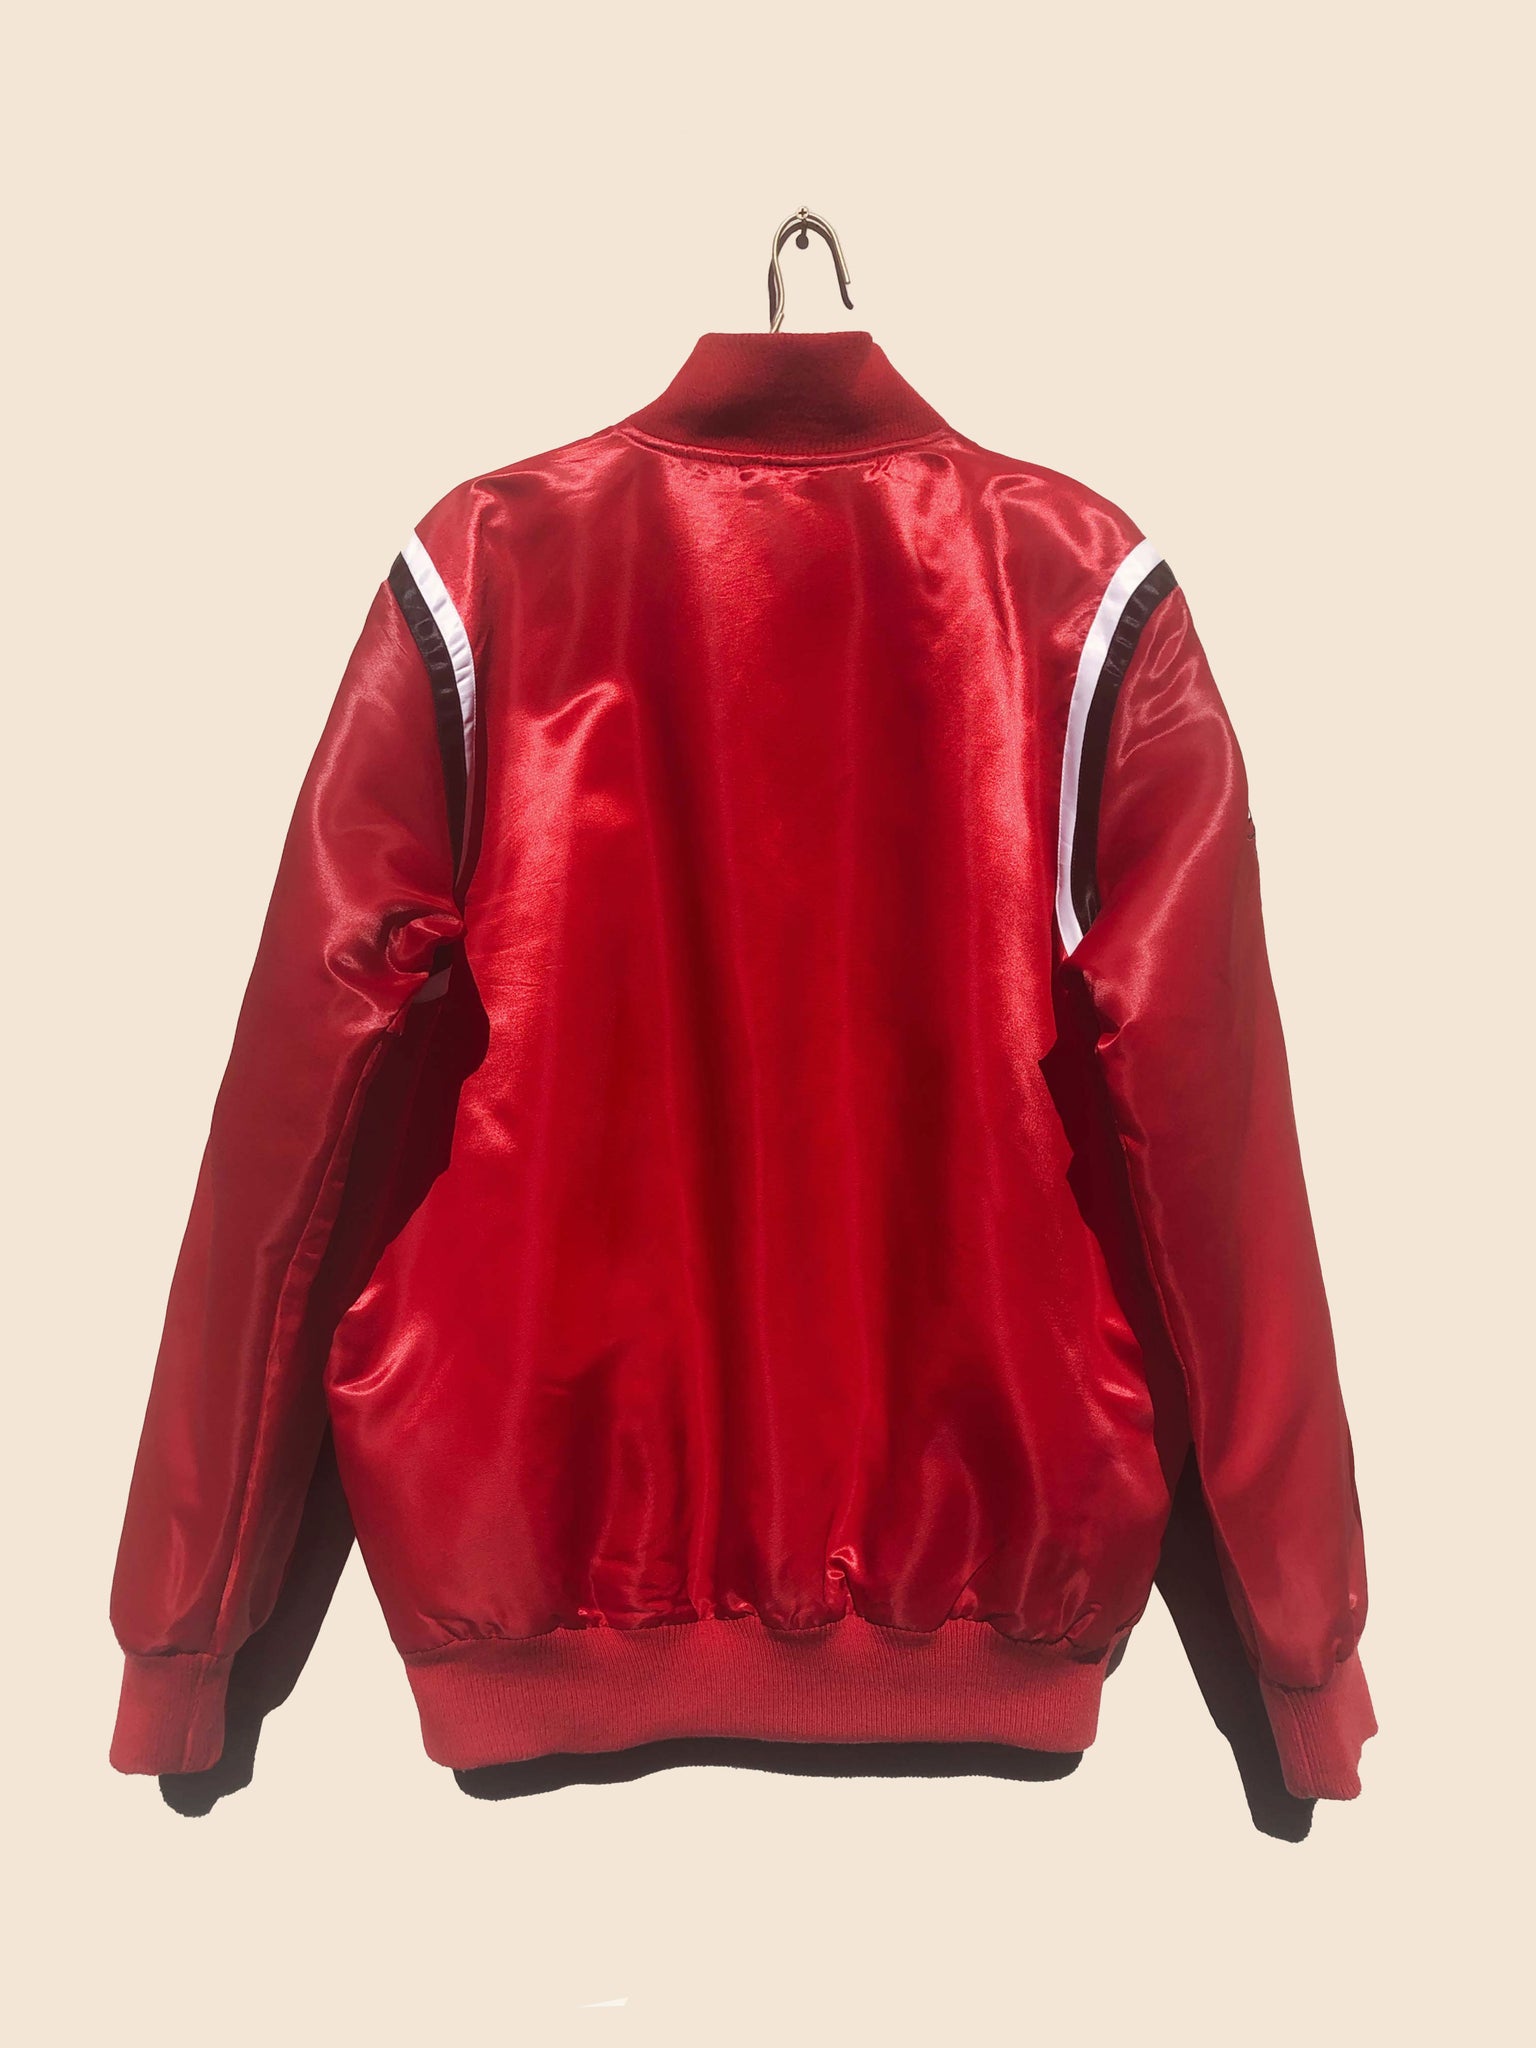 NBA Chicago Bulls Starter Bomber Suey (M) – Chop Jacket Official Red